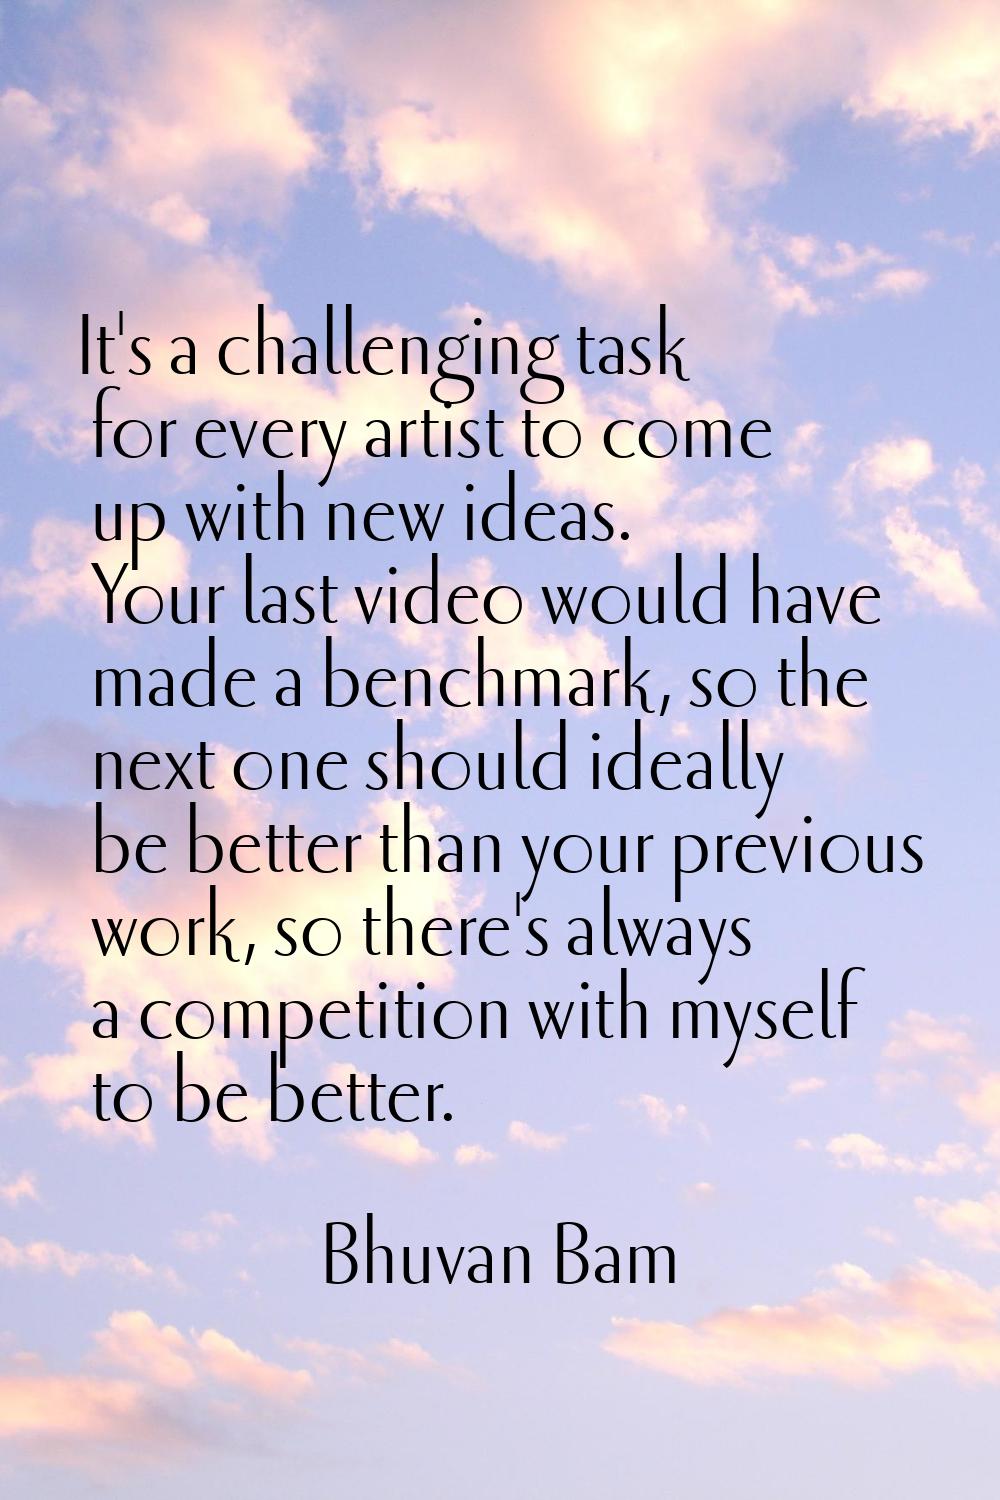 It's a challenging task for every artist to come up with new ideas. Your last video would have made